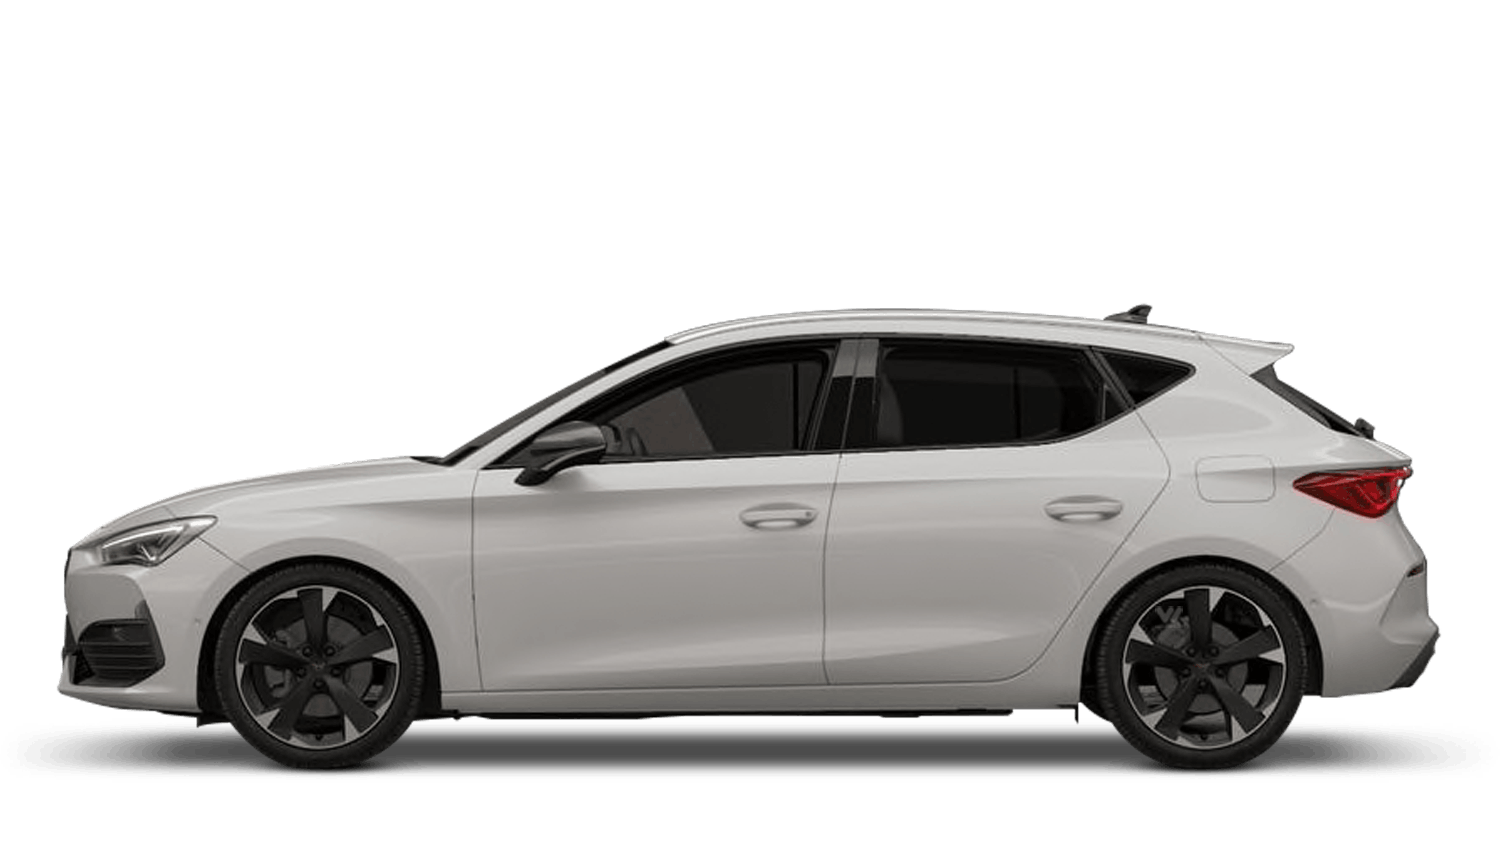 CUPRA Leon 5dr Business Contract Hire offers